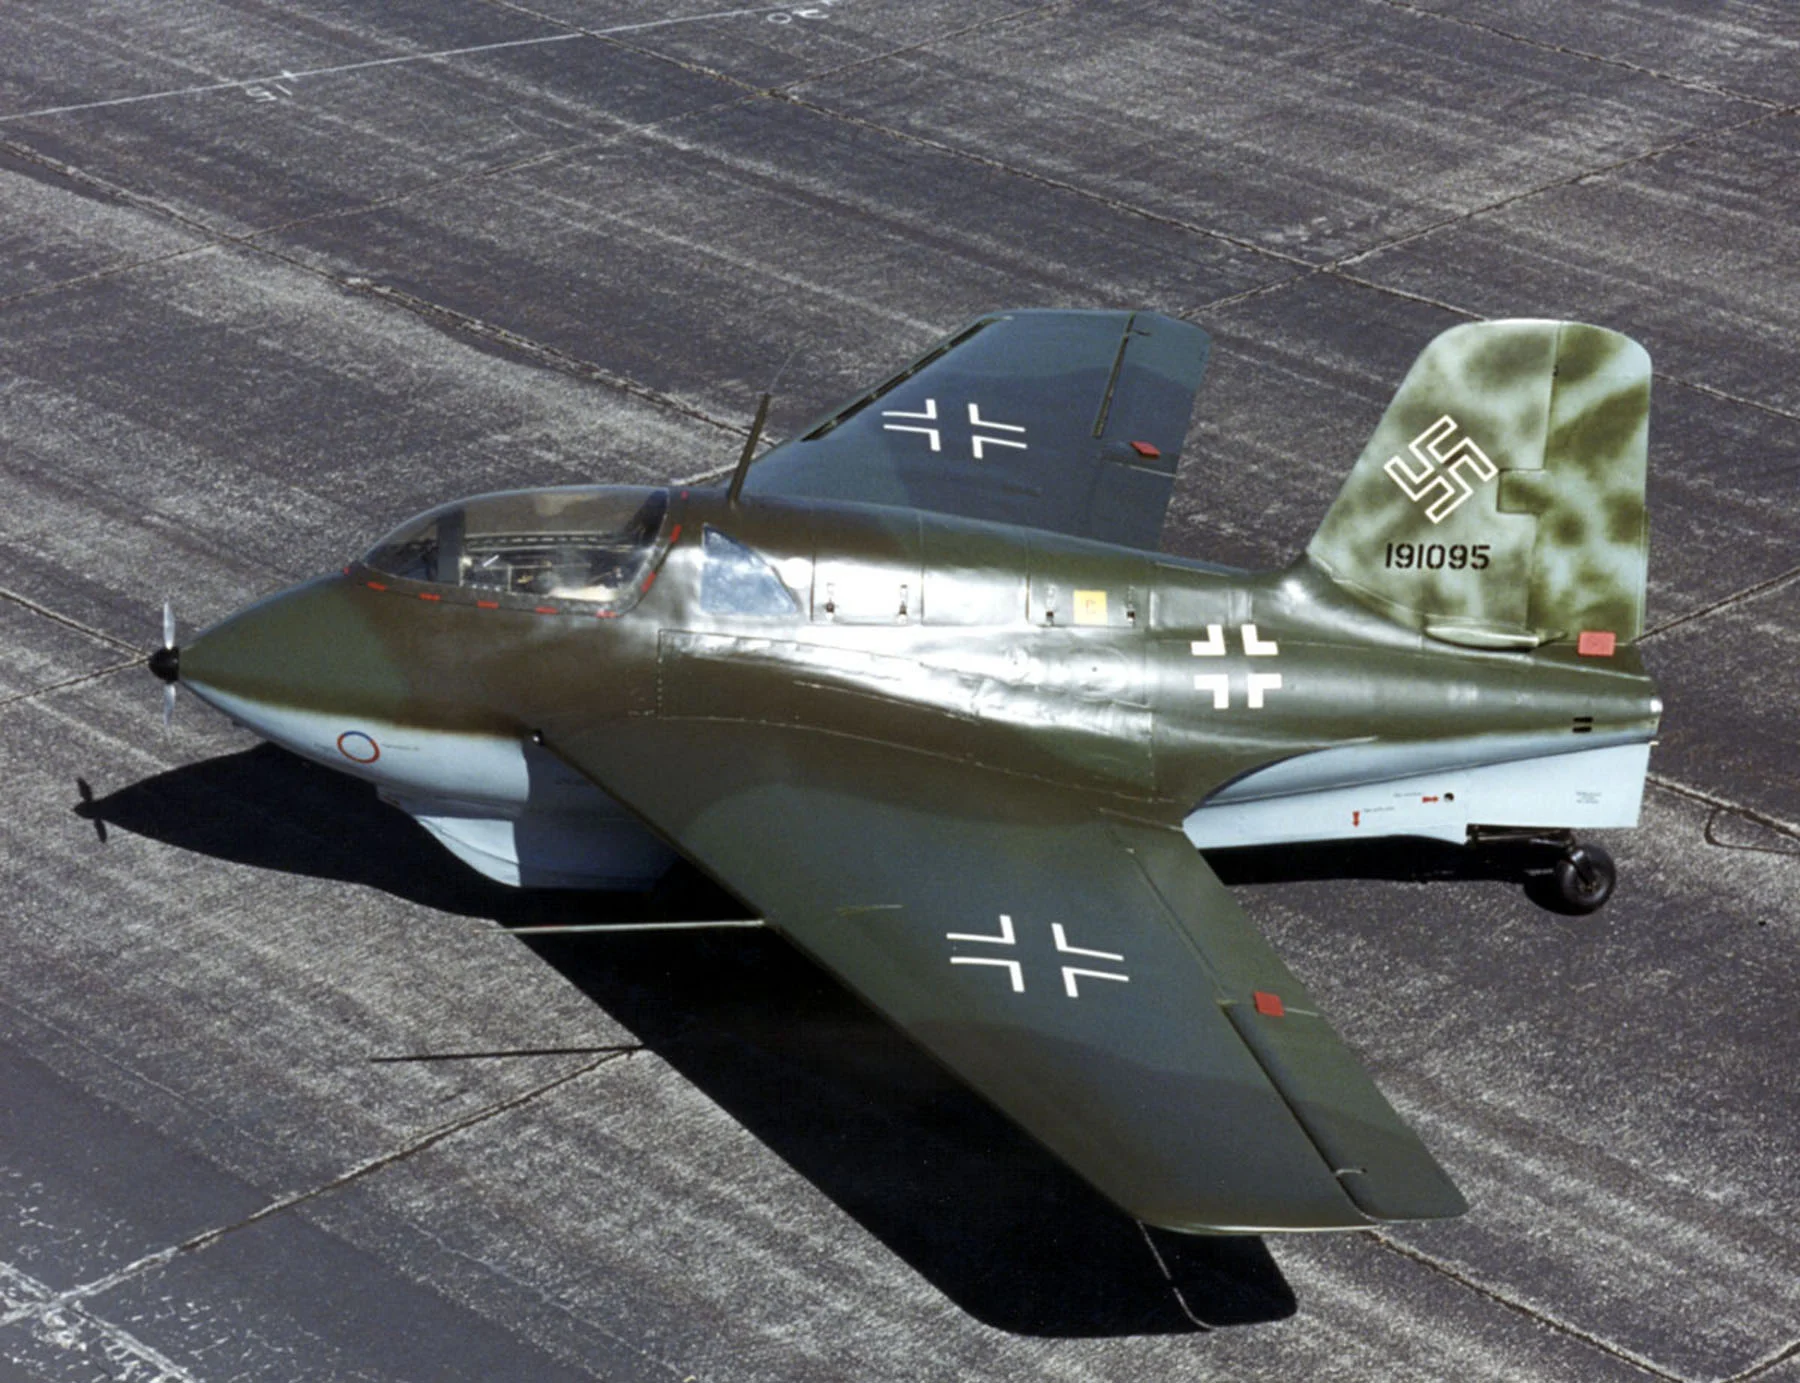 Brown was one of the very few Allied pilots who flew the Me 163.